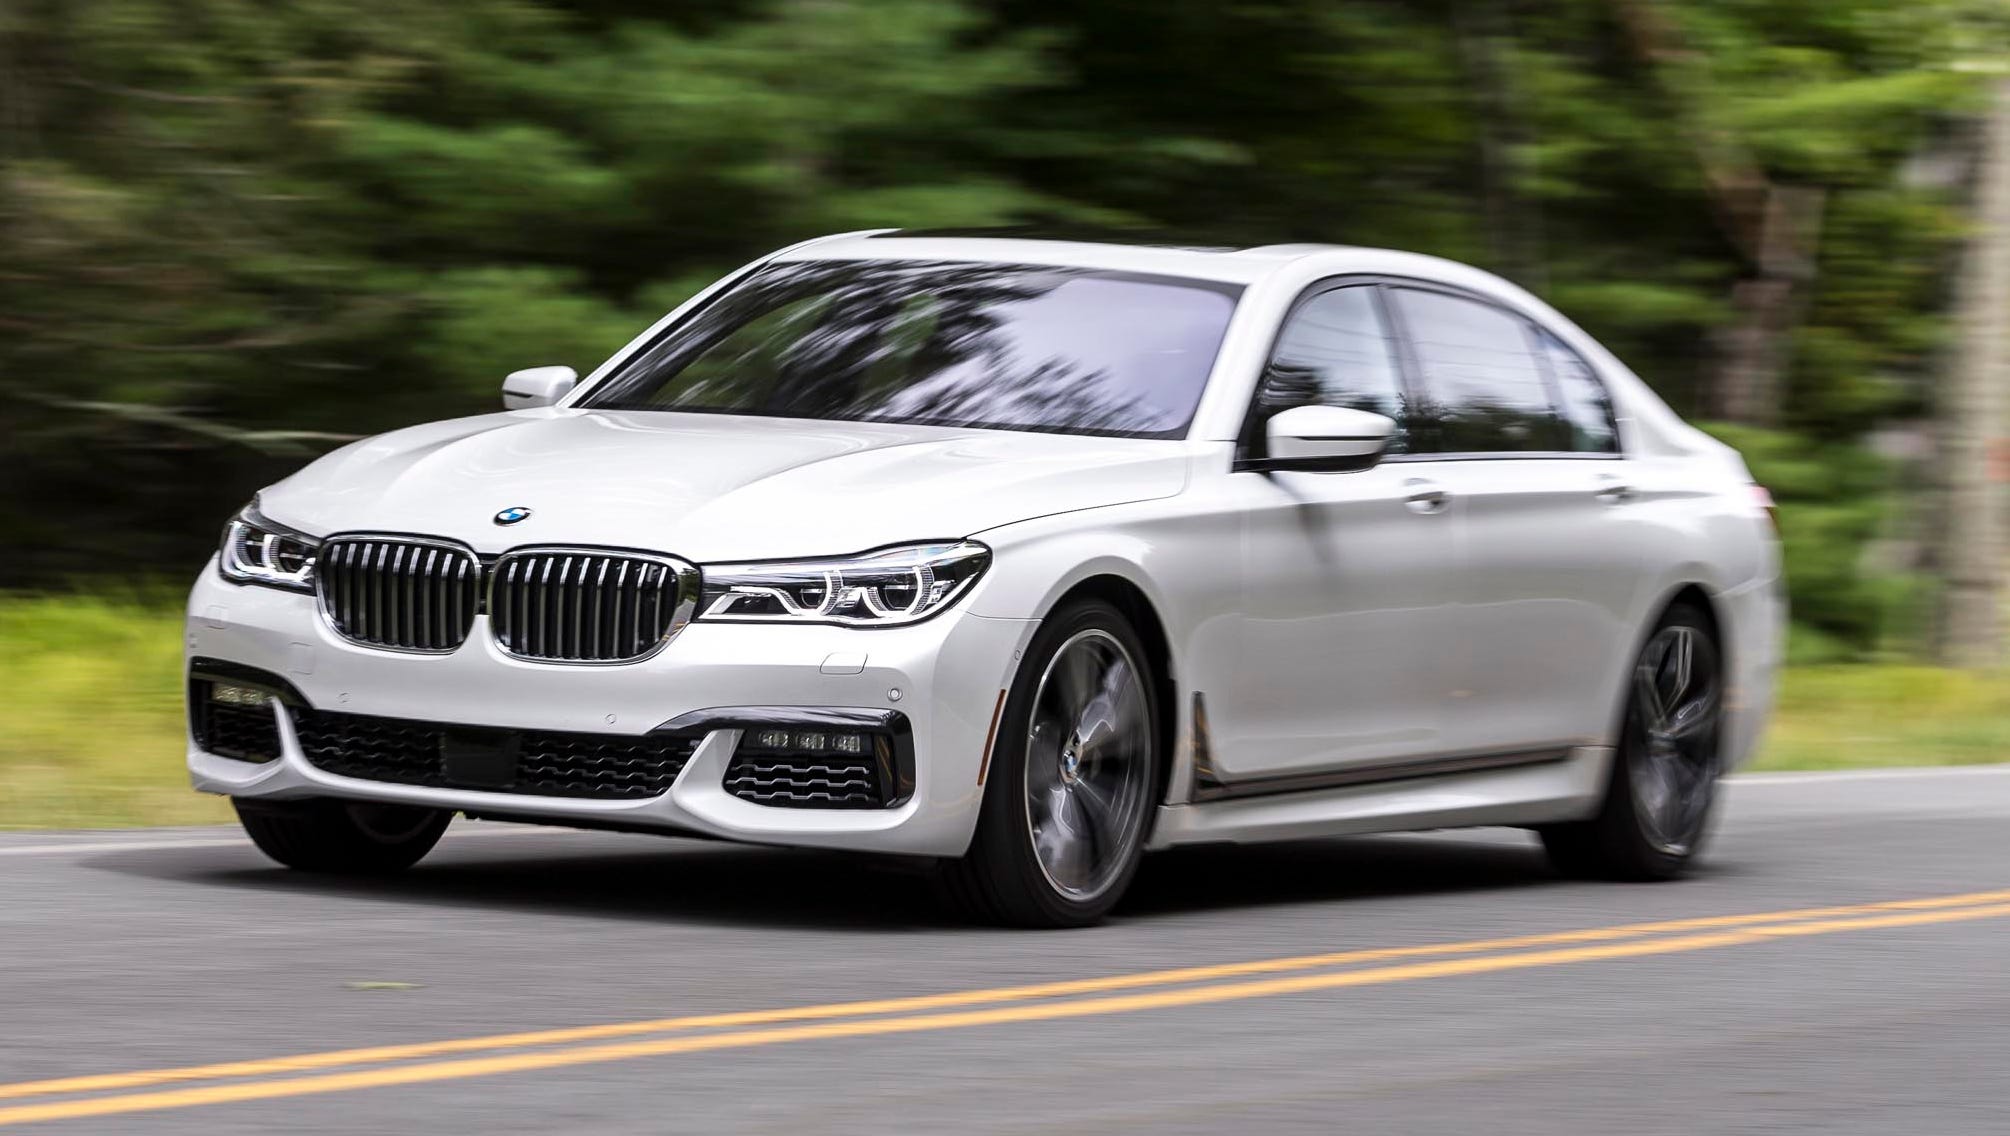 Review: BMW 750i xDrive scores with luxury, simplicity